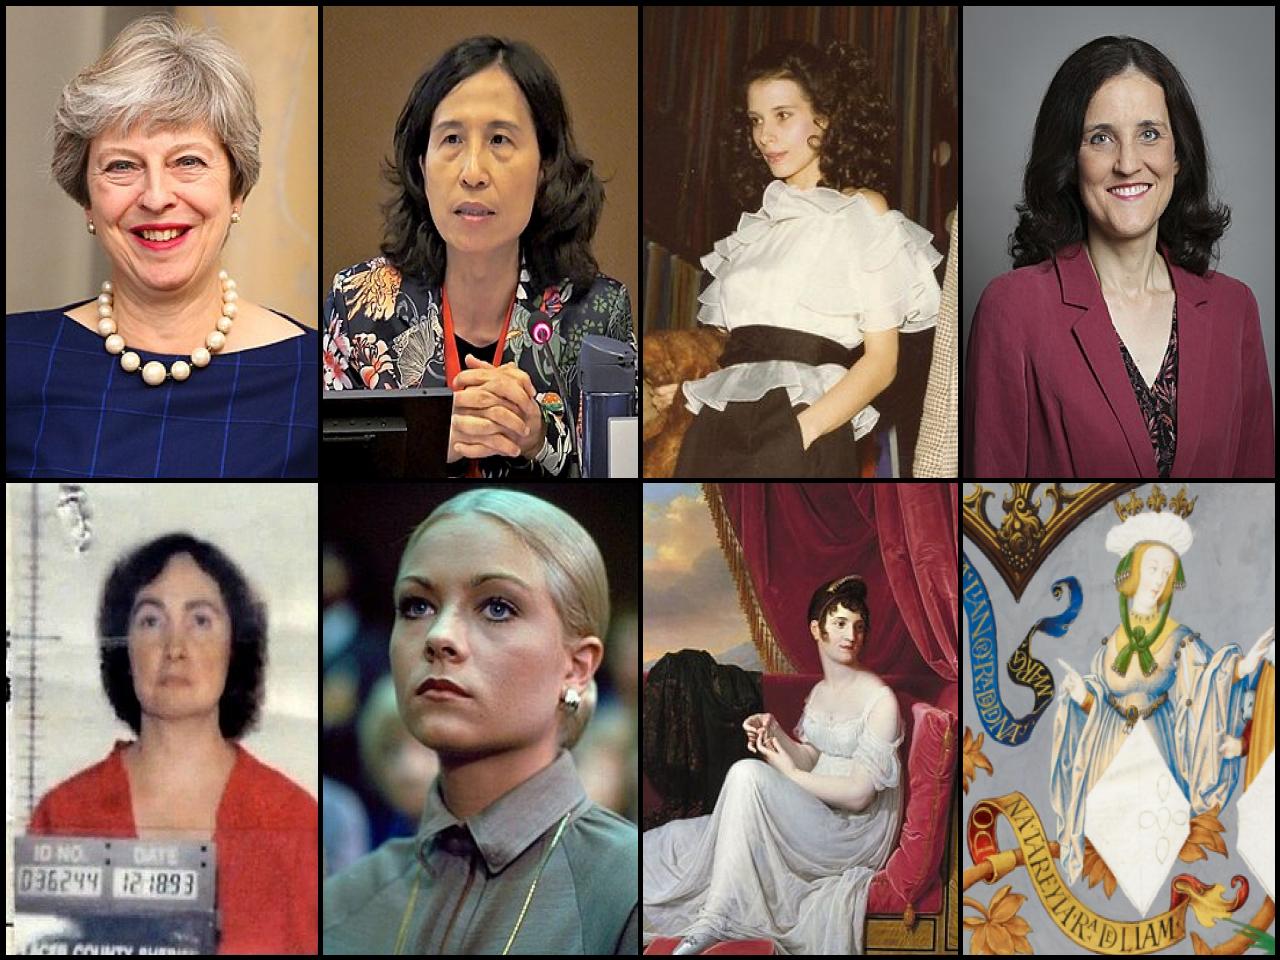 List of Famous people named <b>Theresa</b>